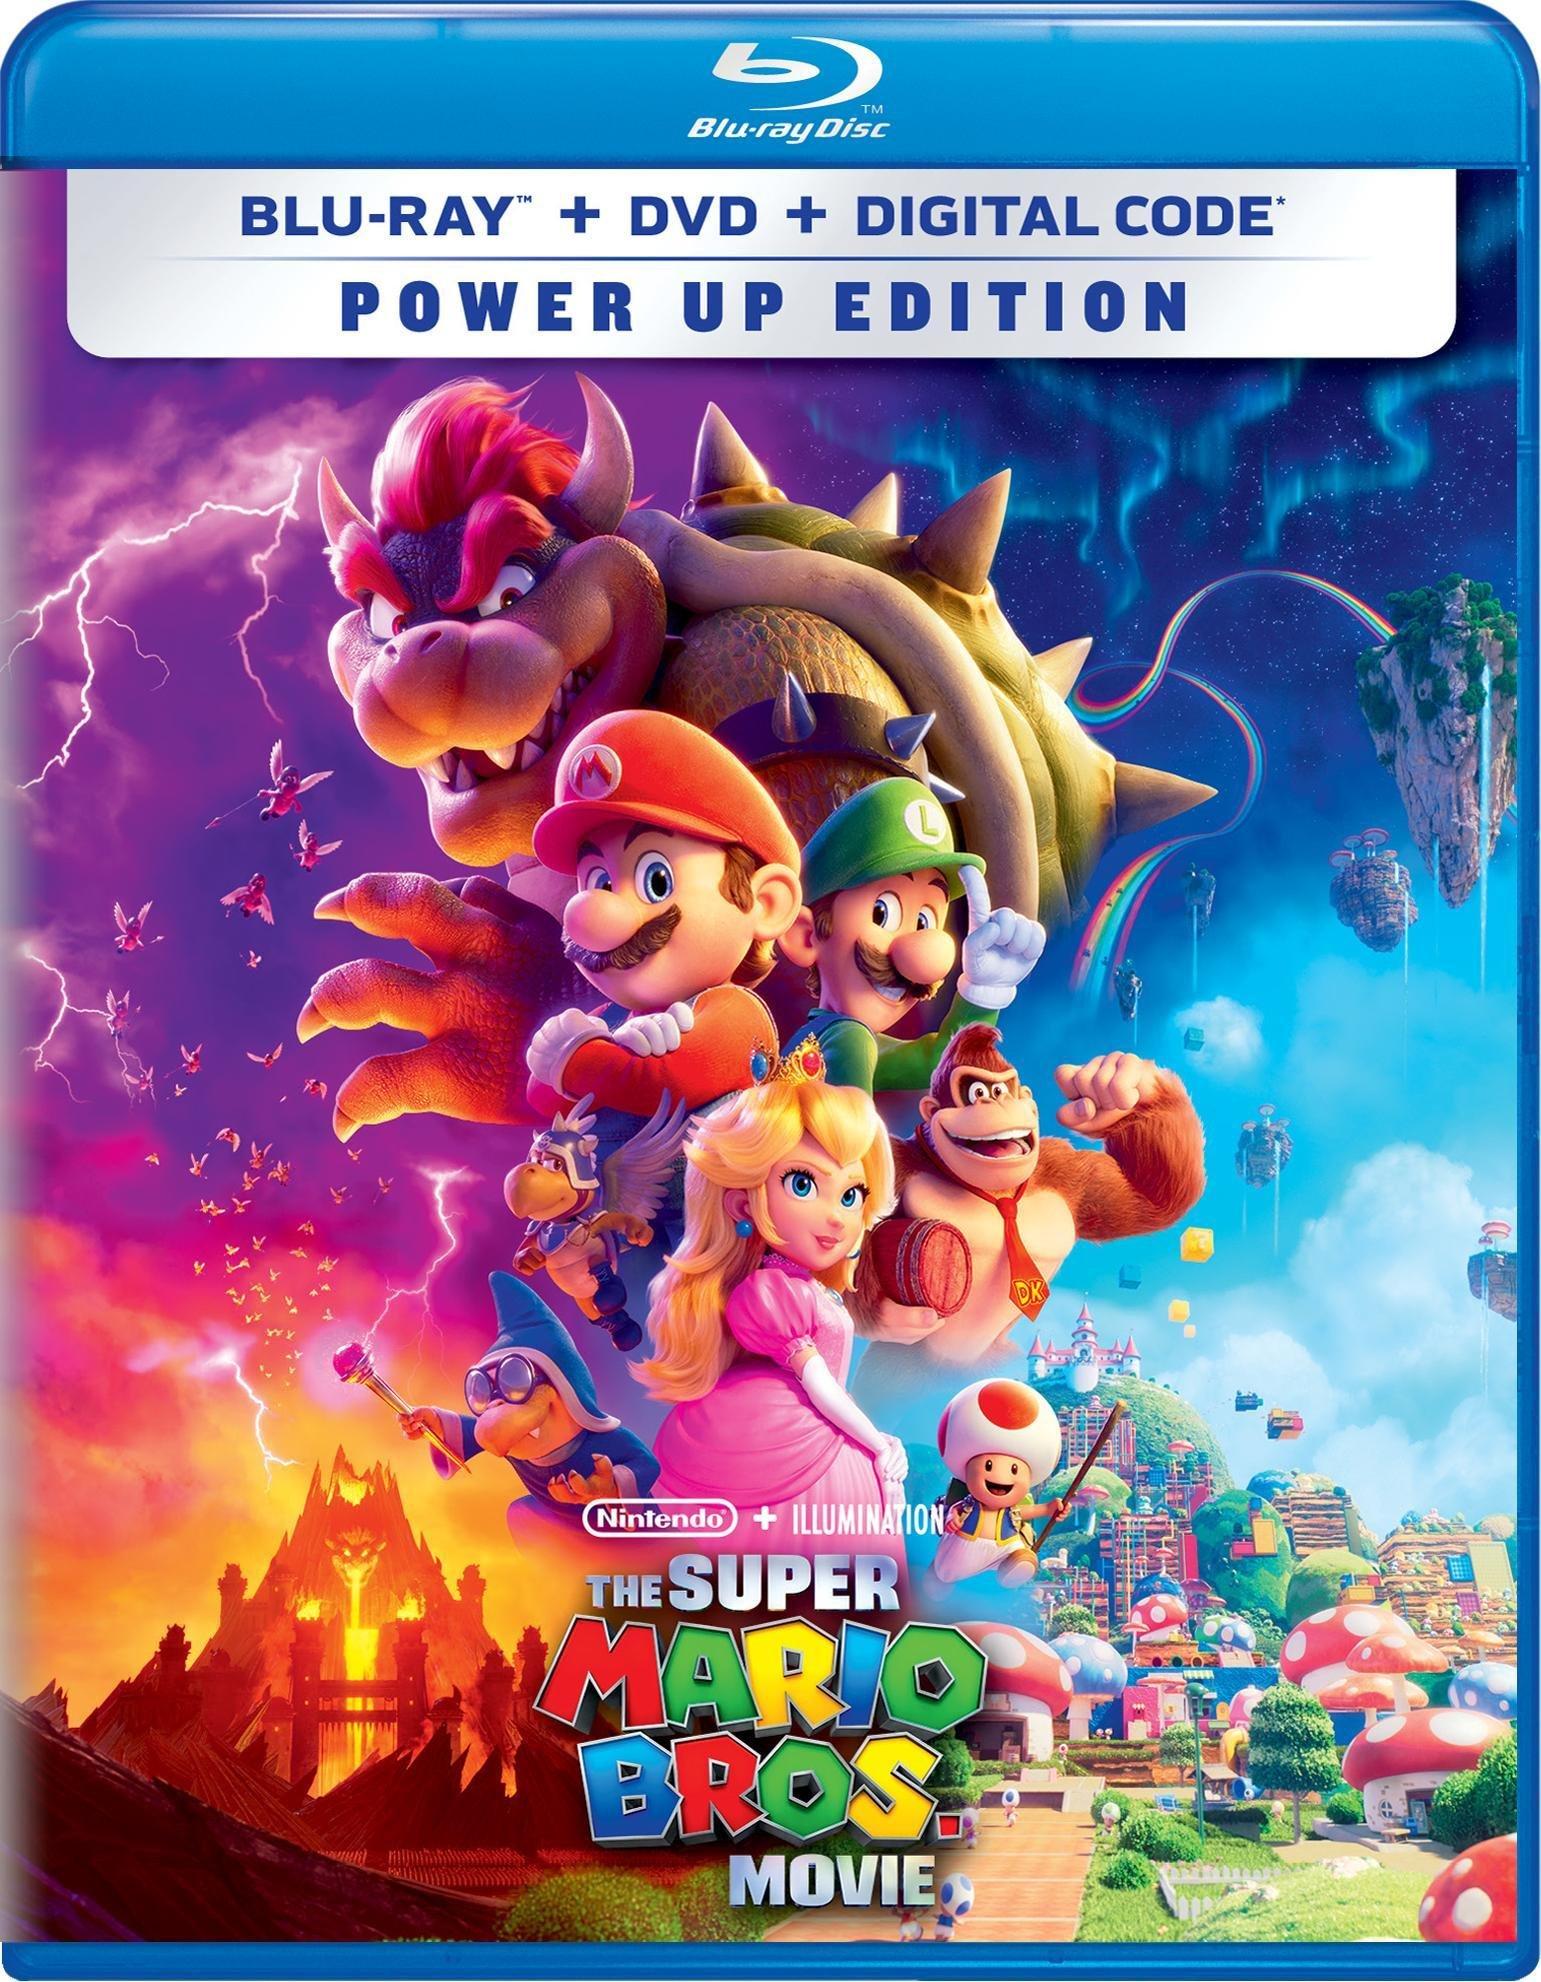 Playing The Super Mario Bros. Movie DVD and Blu-Ray on Xbox 360